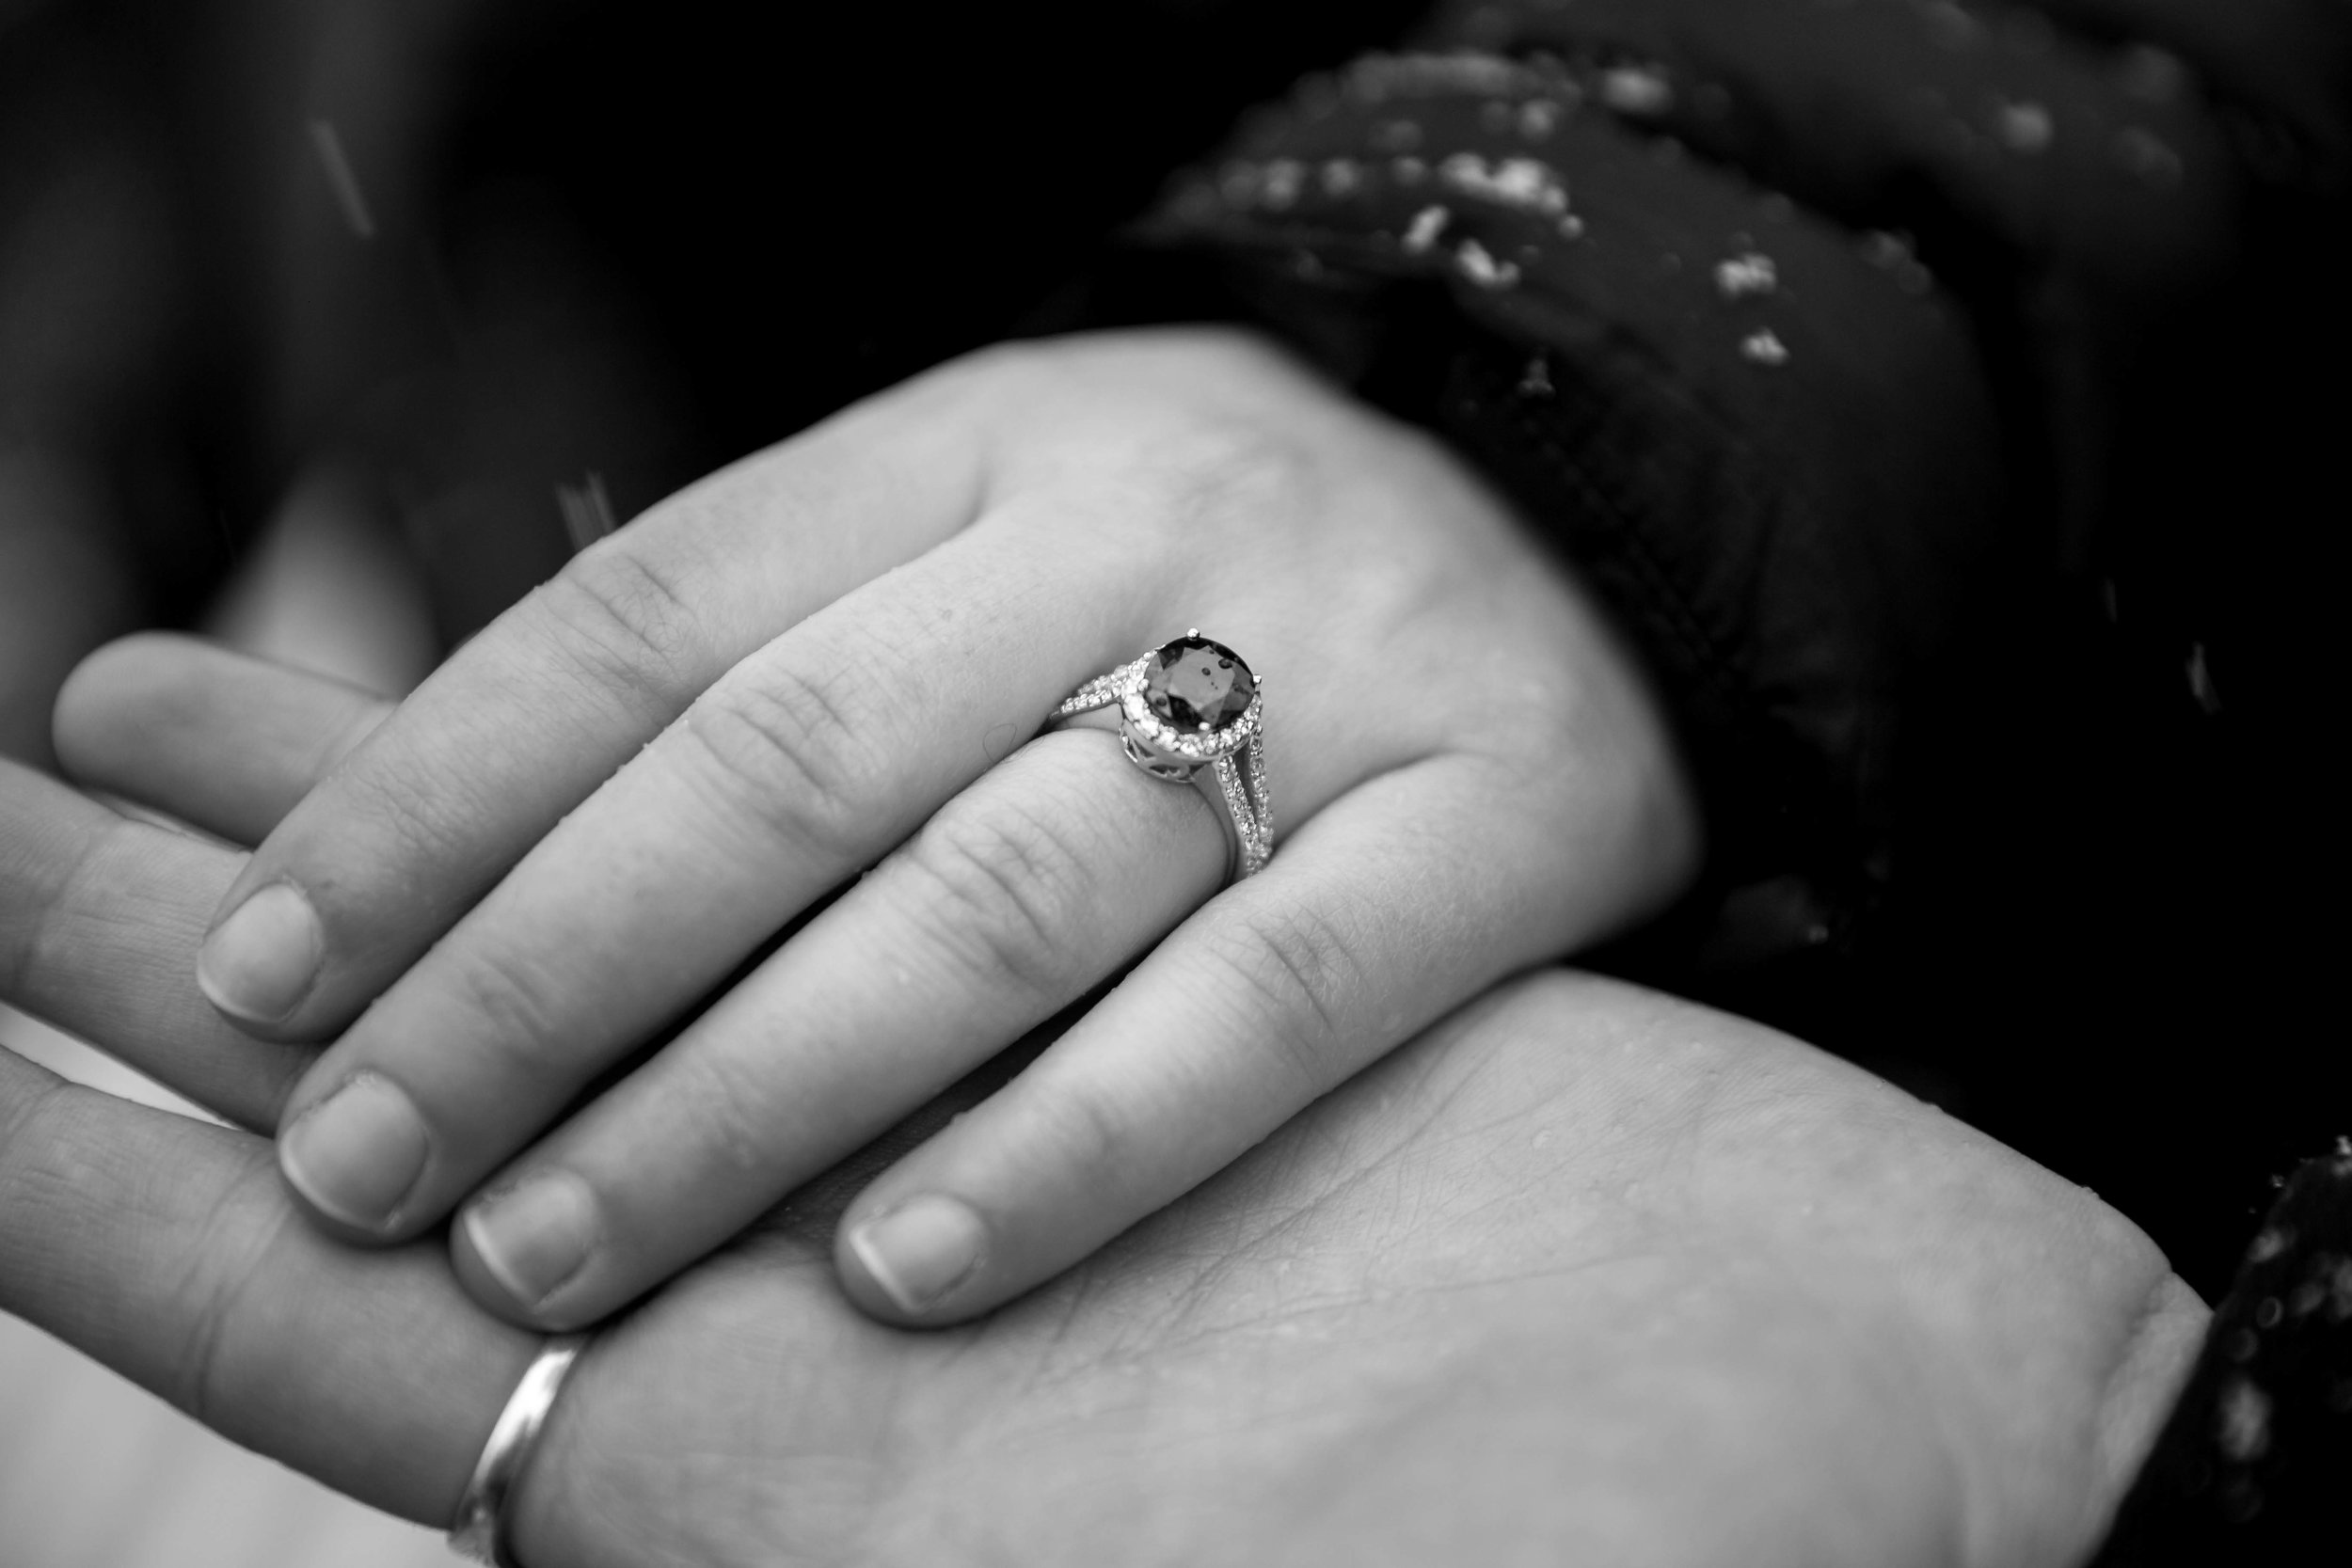 central-park-proposal-engagment-photography-snow-12.jpg